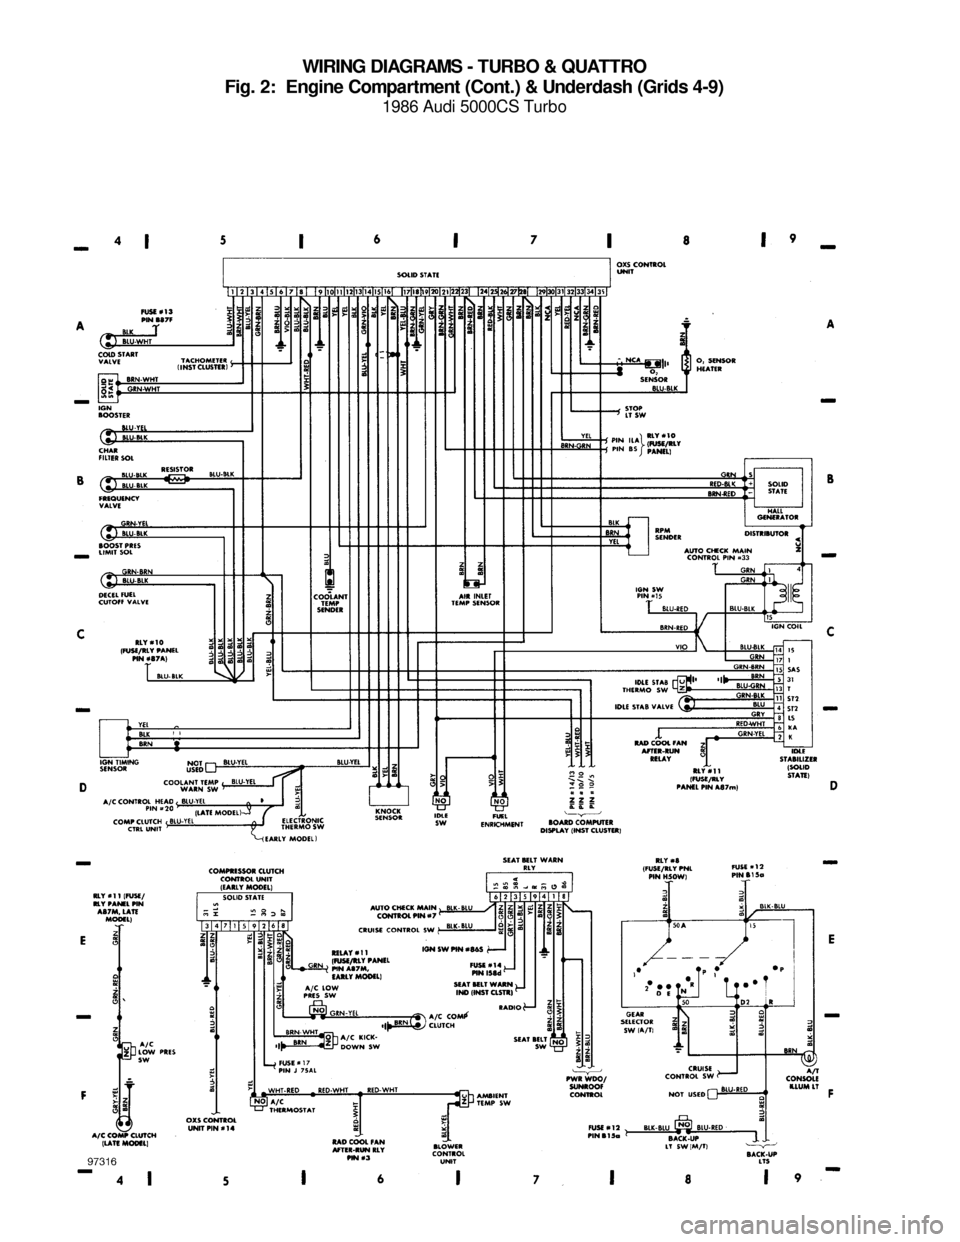 AUDI 5000CS 1986 C2 System Wiring Diagram WIRING DIAGRAMS - TURBO & QUATTRO
Fig. 2:  Engine Compartment (Cont.) & Underdash (Grids 4-9)
1986 Audi 5000CS Turbo
For x    
Copyright © 1998 Mitchell Repair Information Company, LLCMonday, July 19